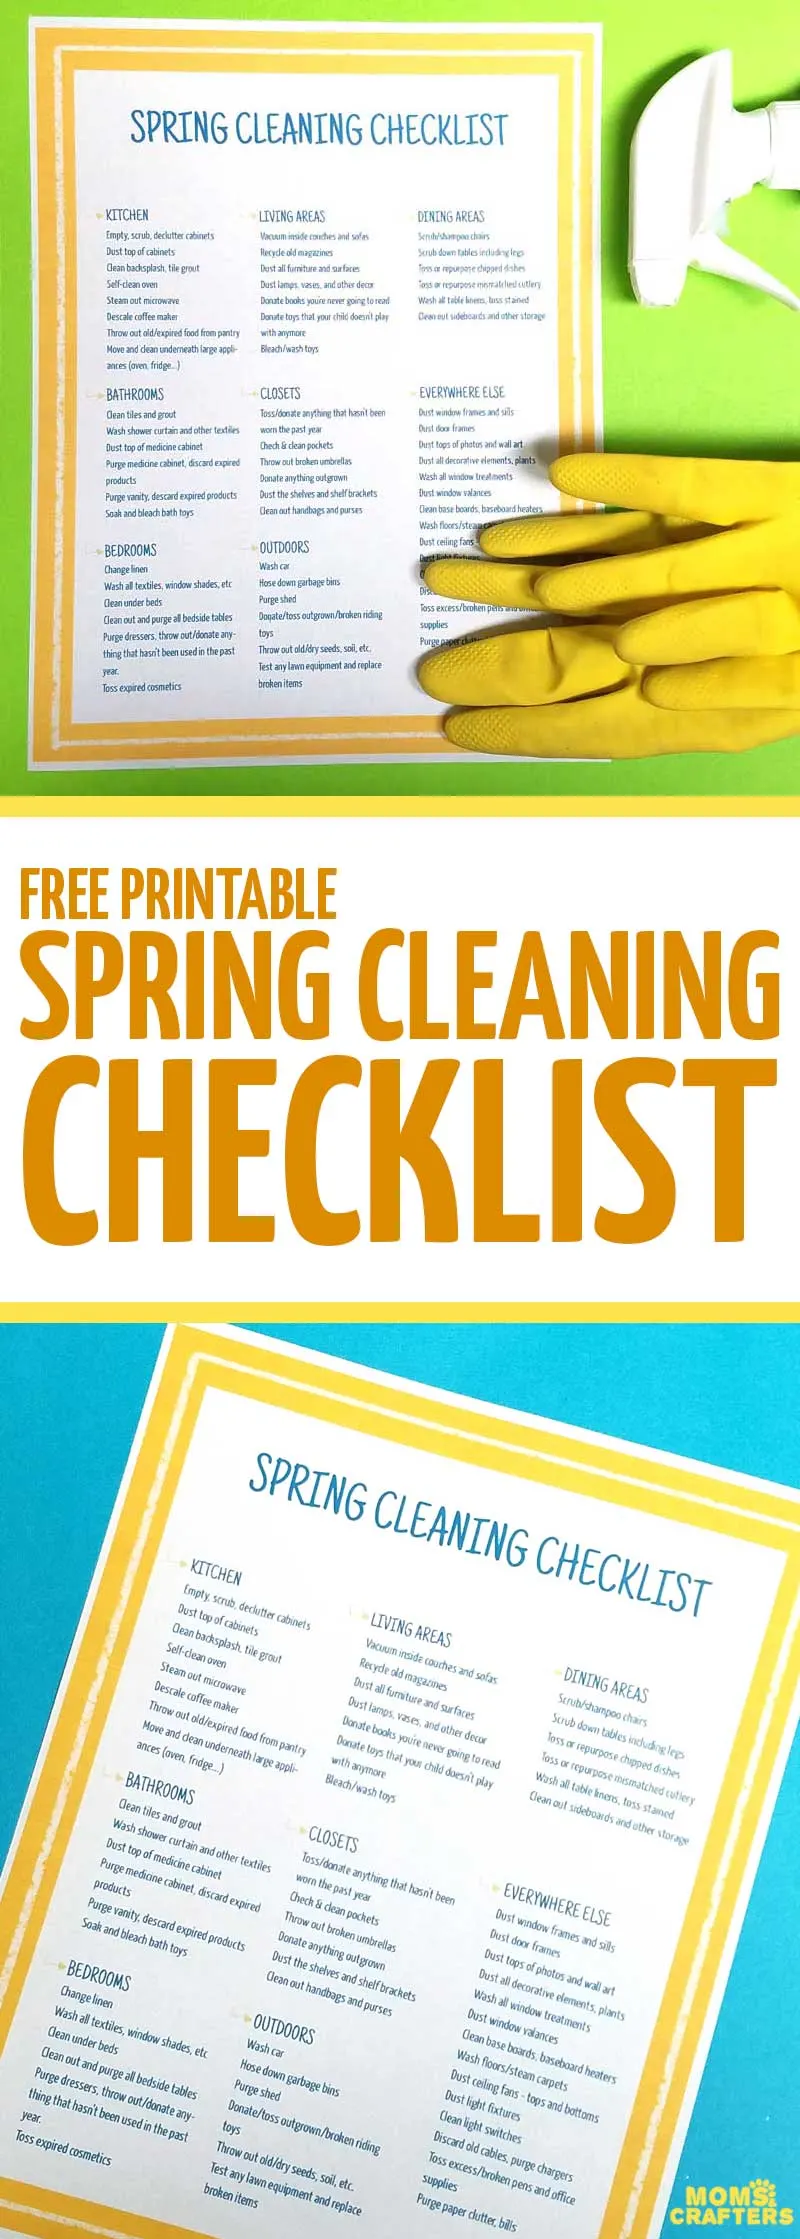 One of my favorite spring cleaning tips: use a free printable spring cleaning checklist to make sure you don't forget anything! This in-depth checklist is so pretty to keep around and easy to use. #springcleaning #cleaningtips #momsandcrafters